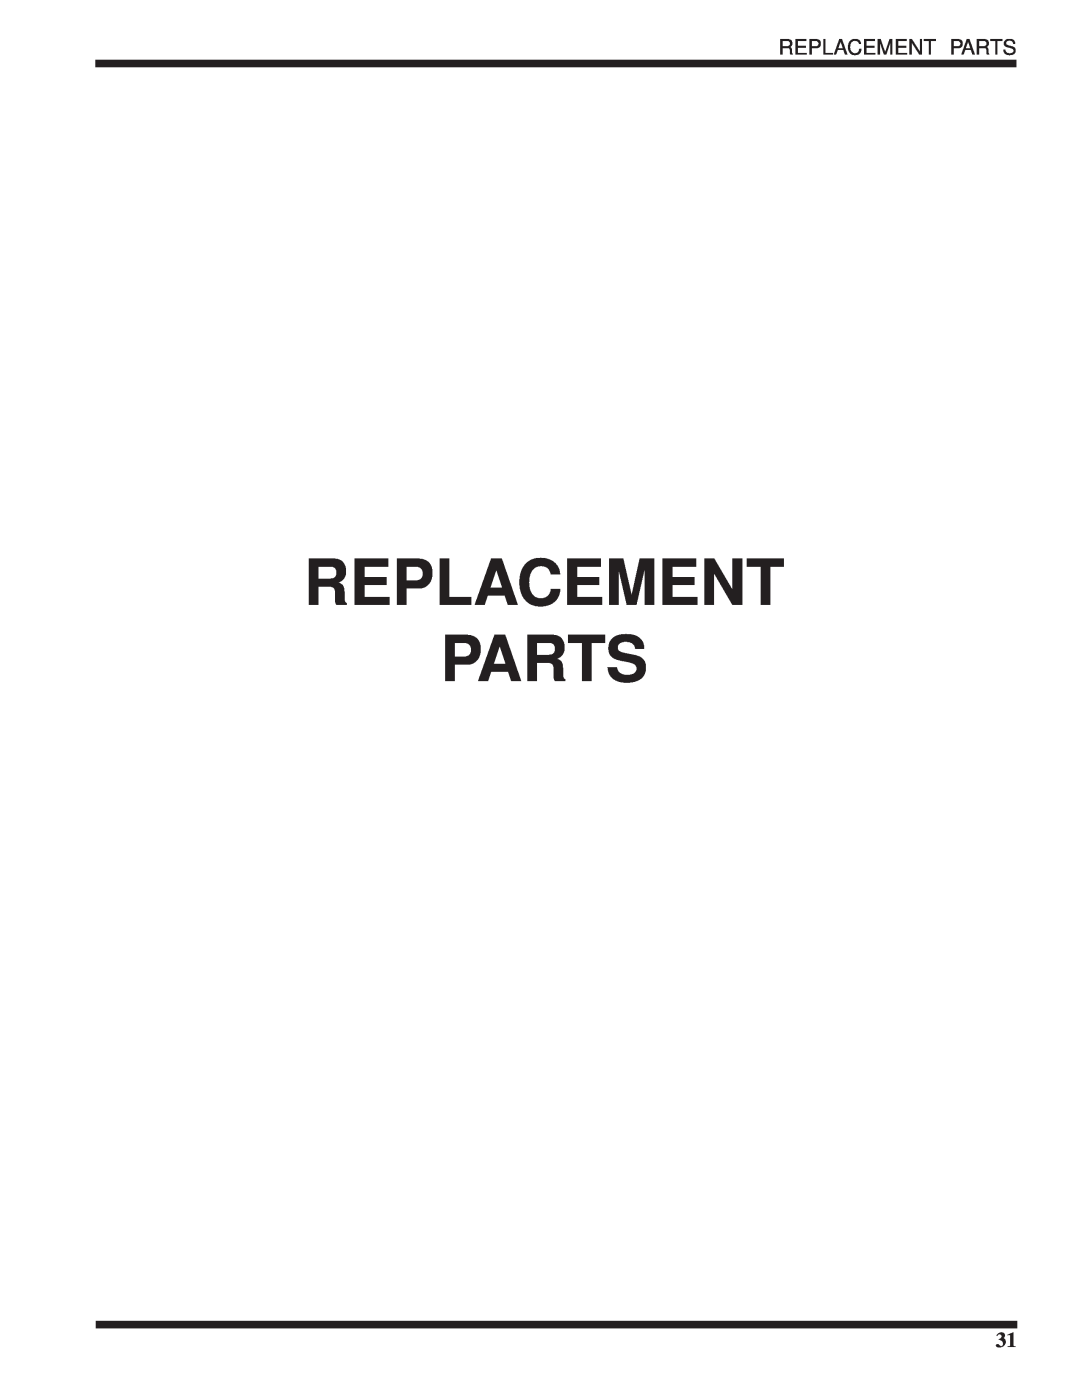 Moyer Diebel MH-6NM5, MH-6LM5, MH-60M5 technical manual Replacement Parts 